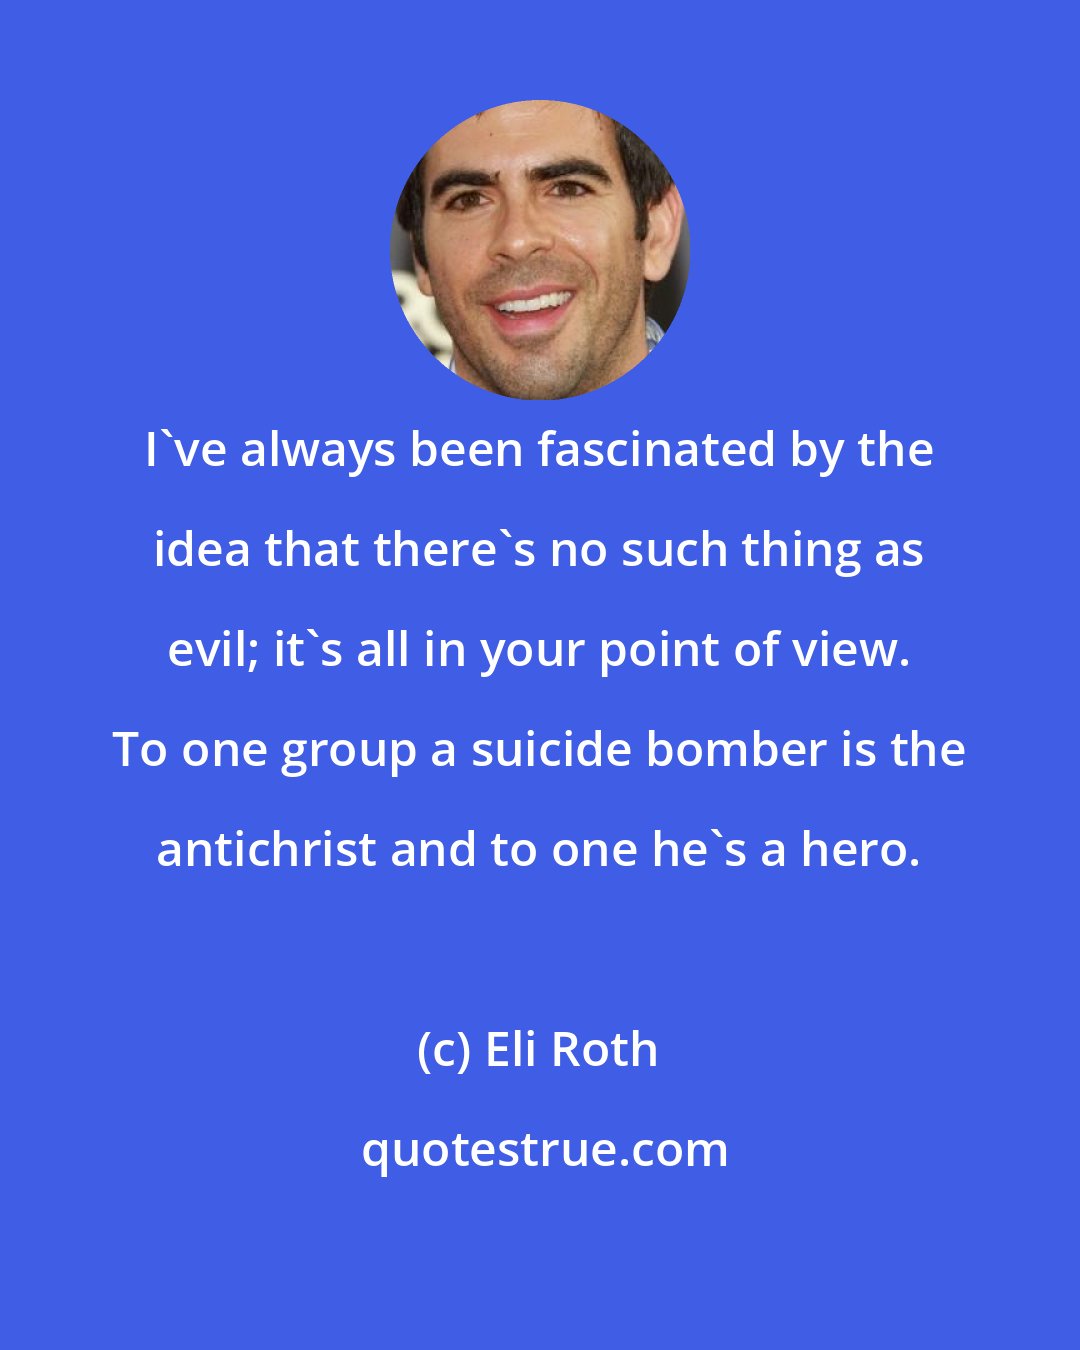 Eli Roth: I've always been fascinated by the idea that there's no such thing as evil; it's all in your point of view. To one group a suicide bomber is the antichrist and to one he's a hero.